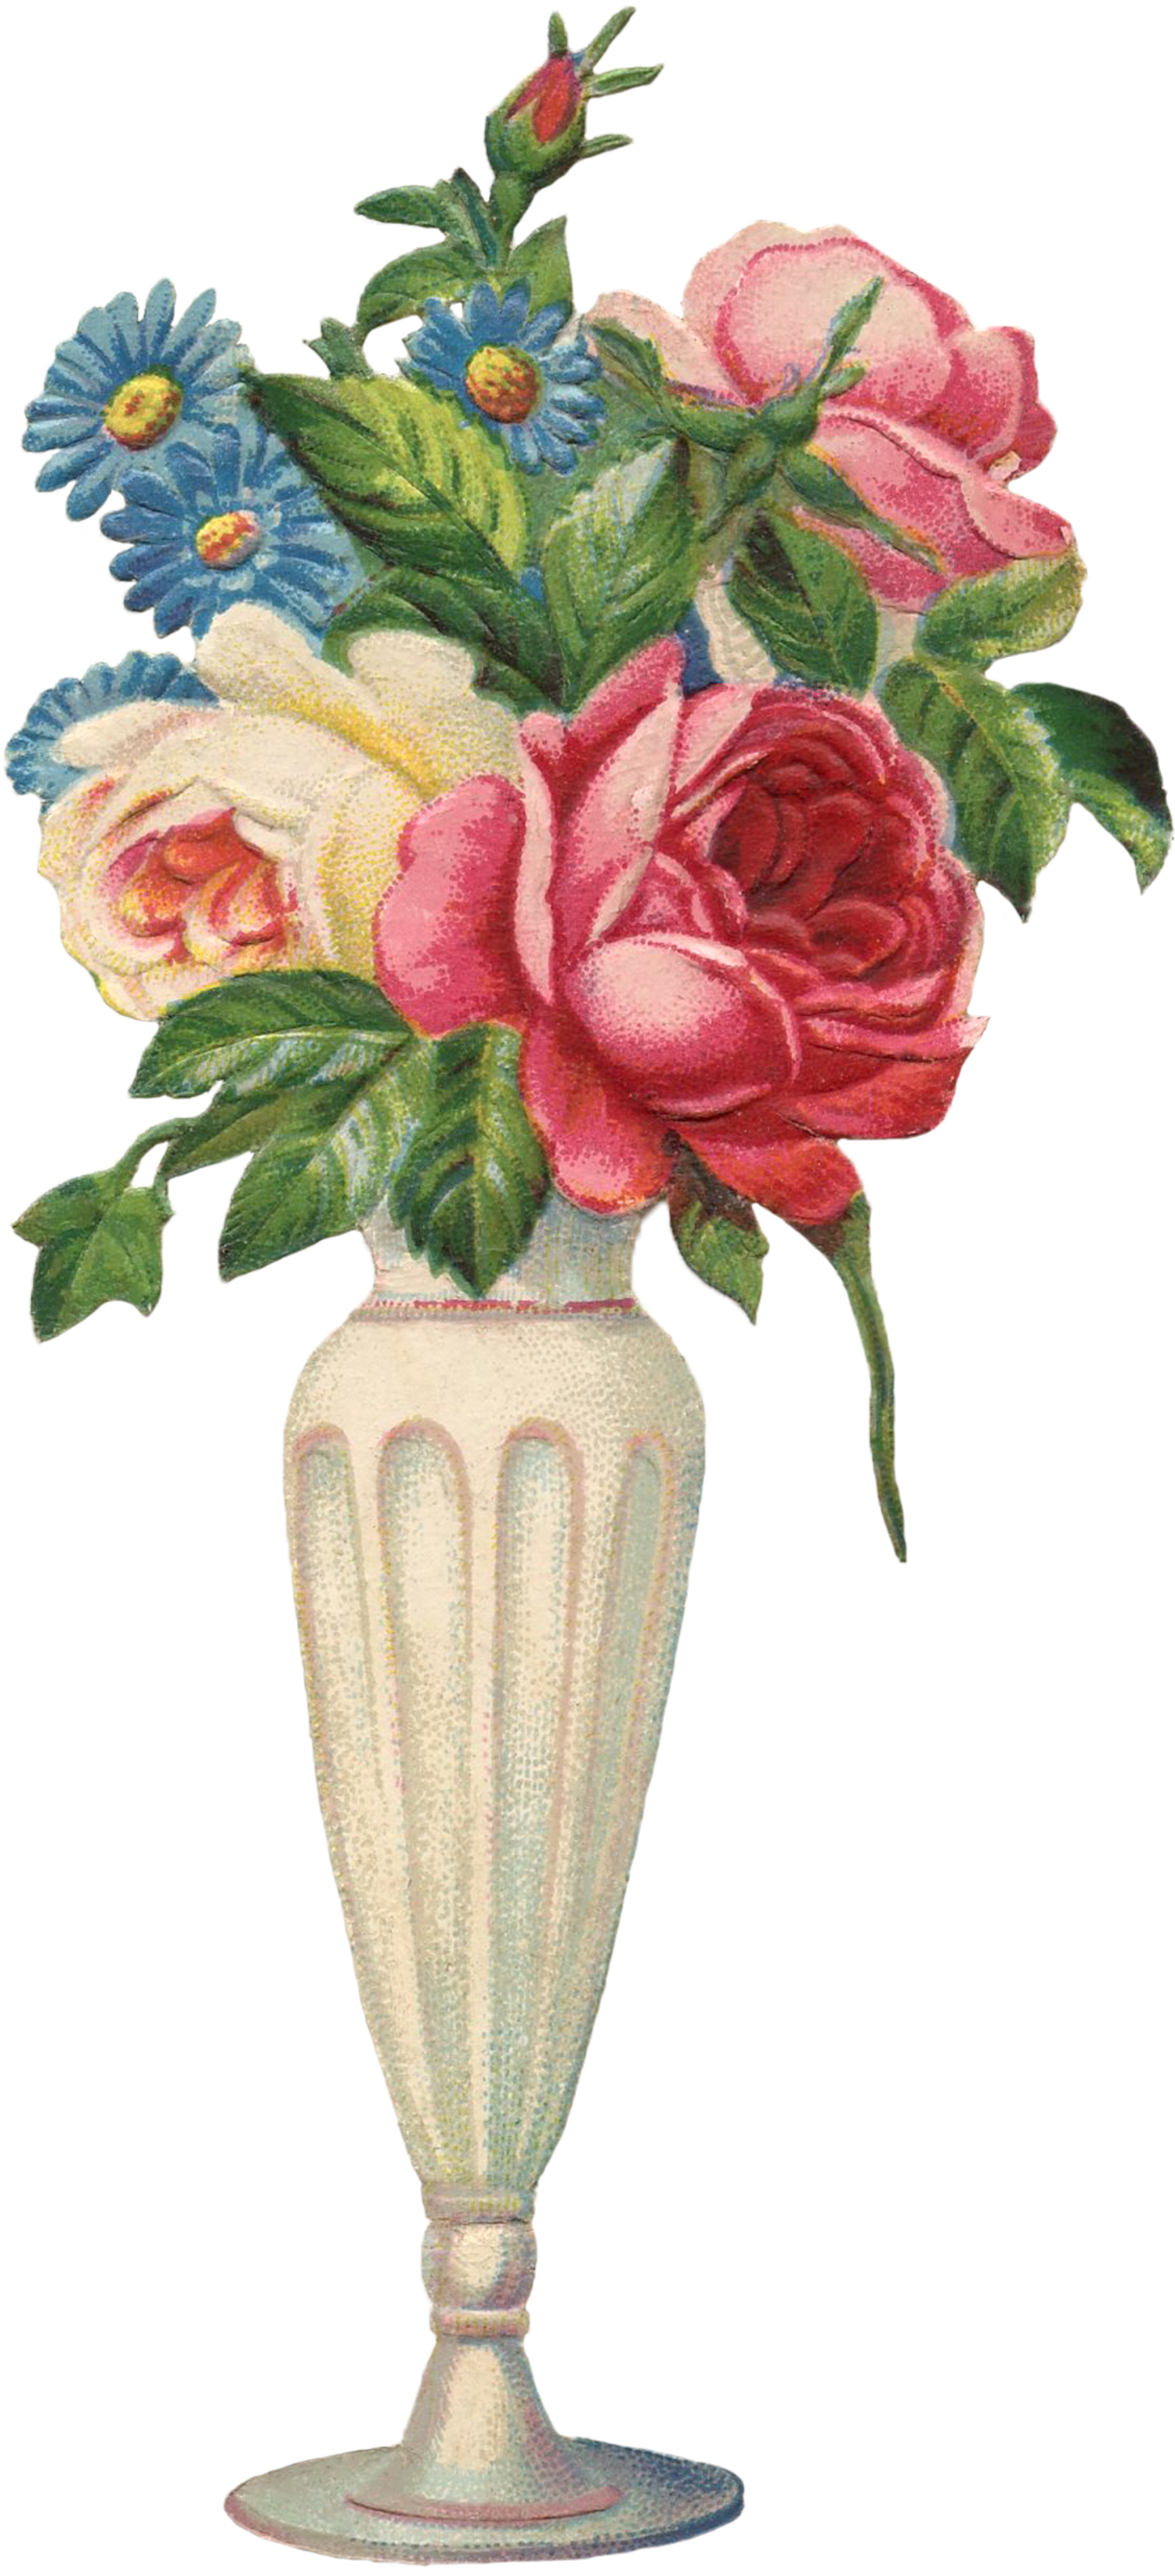 clipart of roses in a vase - photo #24